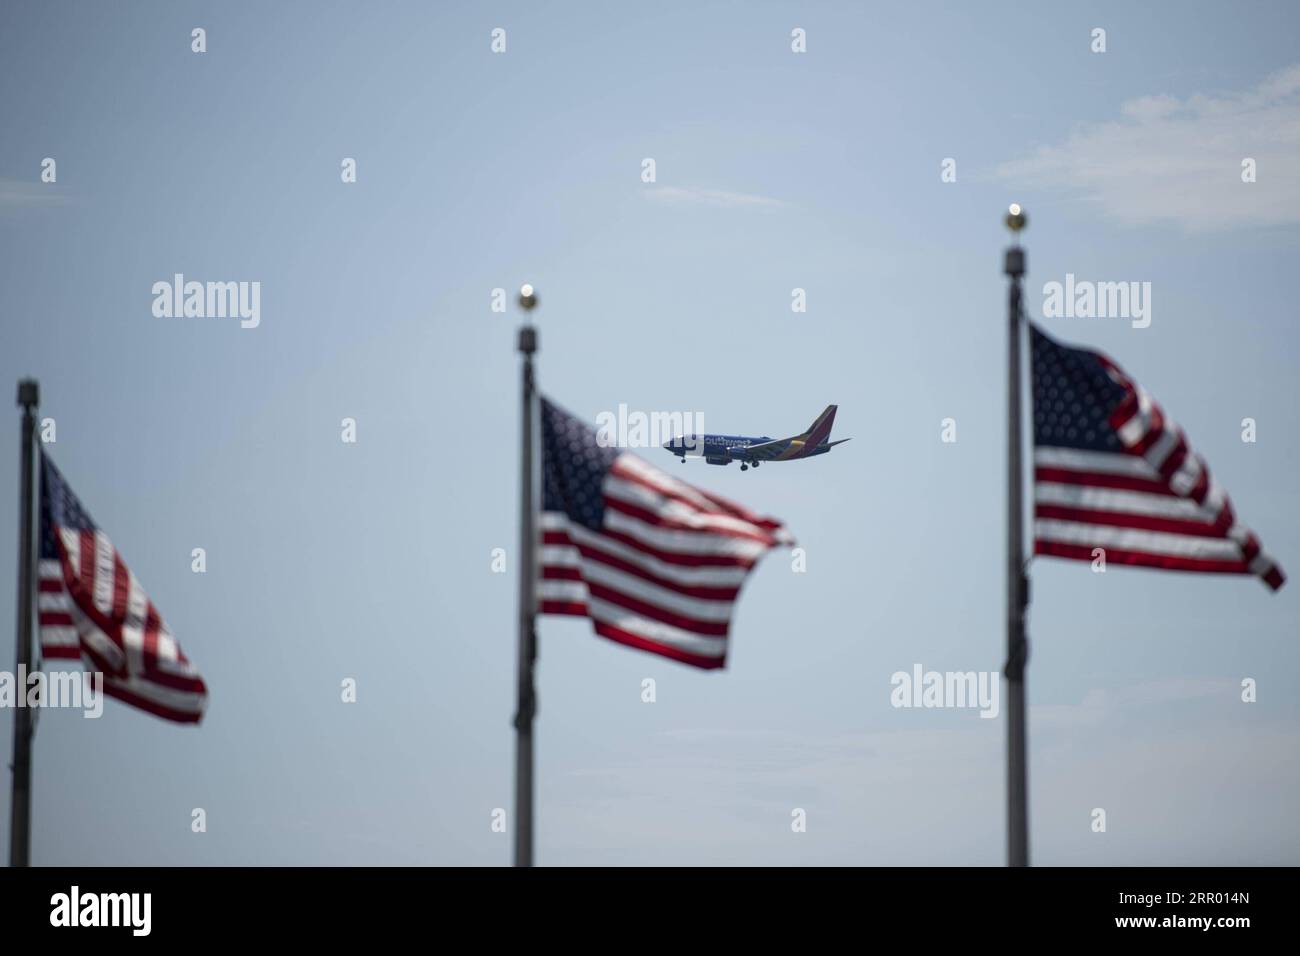 200721 -- WASHINGTON, July 21, 2020 -- A plane flies in the sky with the U.S. national flags in the foreground in Washington, D.C., the United States, on July 21, 2020. U.S. President Donald Trump said Tuesday afternoon that the coronavirus pandemic in the United States will probably get worse before it gets better. More than 3.8 million people in the United States have infected with the virus, with more than 141,000 deaths, according to a count by Johns Hopkins University, as some states, including Florida, are seeing a surge in cases.  U.S.-WASHINGTON, D.C.-TRUMP-CORONAVIRUS PANDEMIC LiuxJie Stock Photo